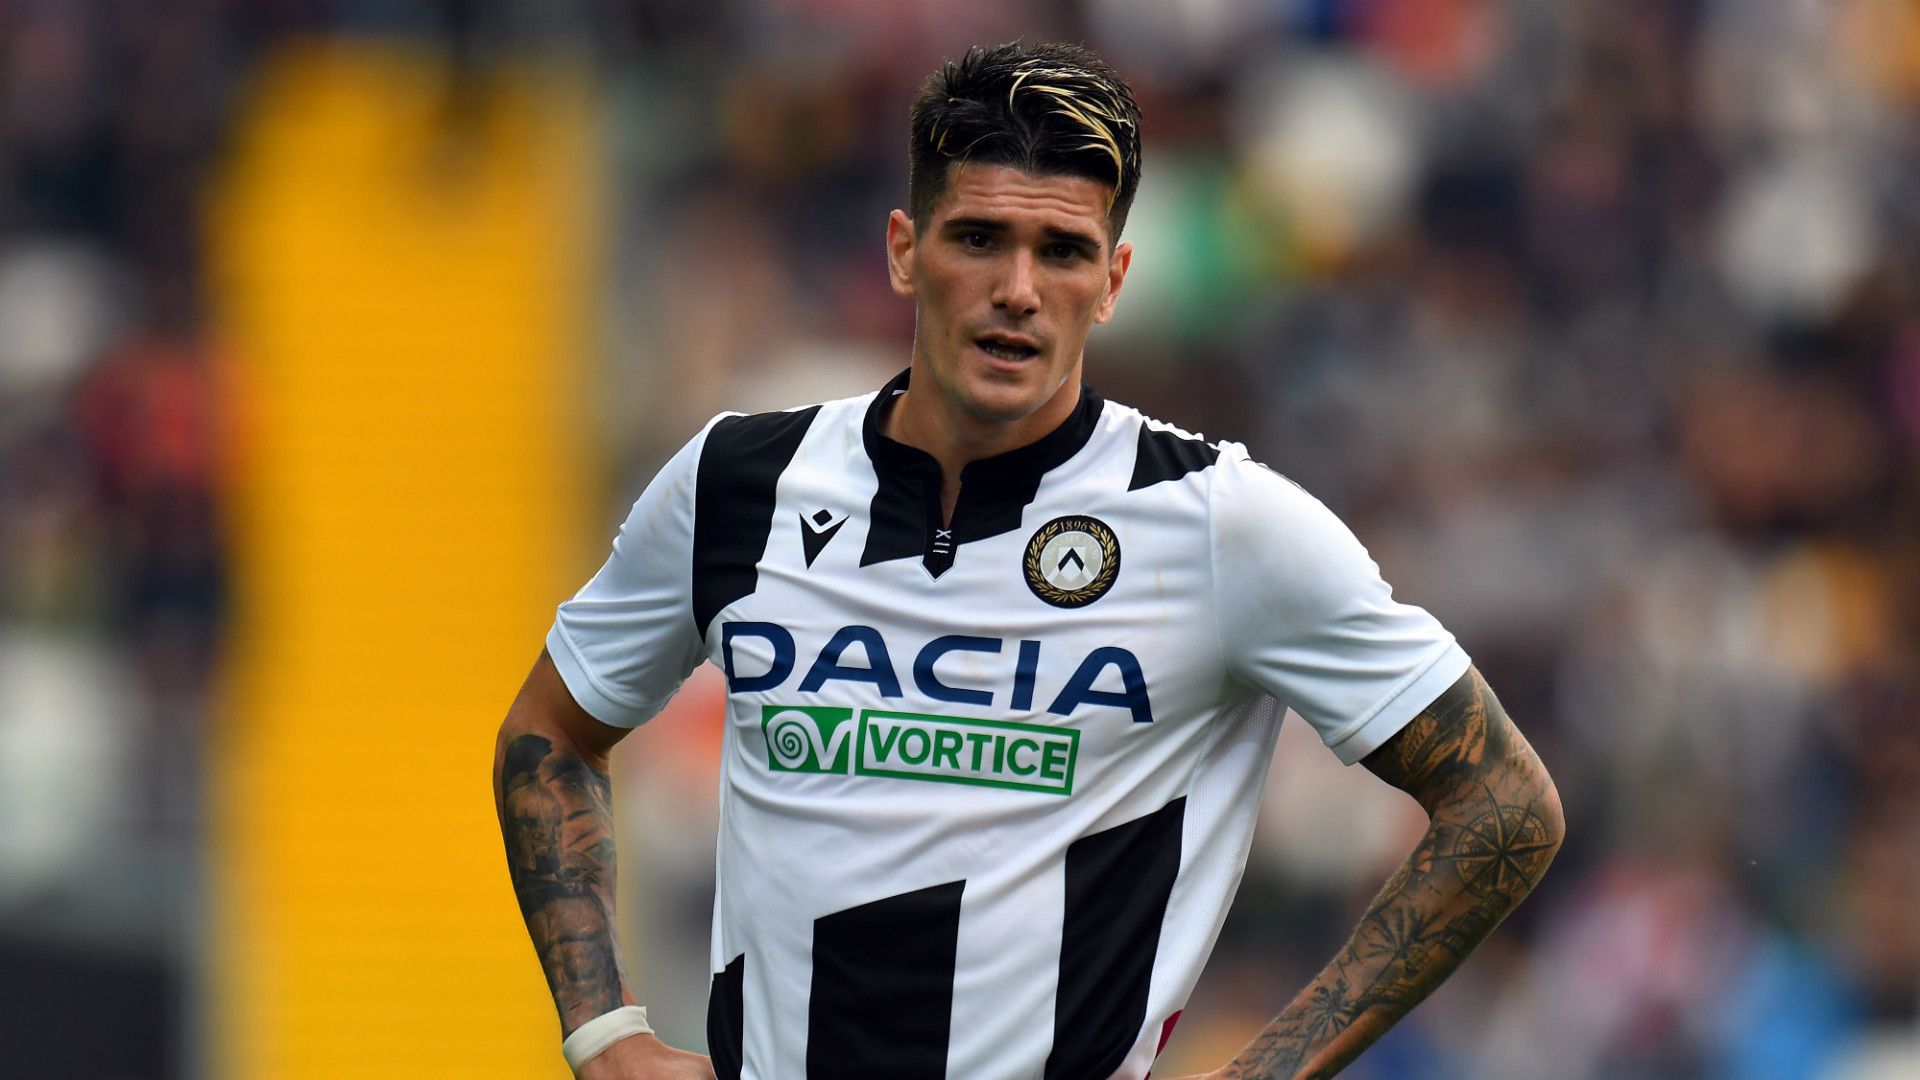 Leeds in talks to sign £27m De Paul from Udinese